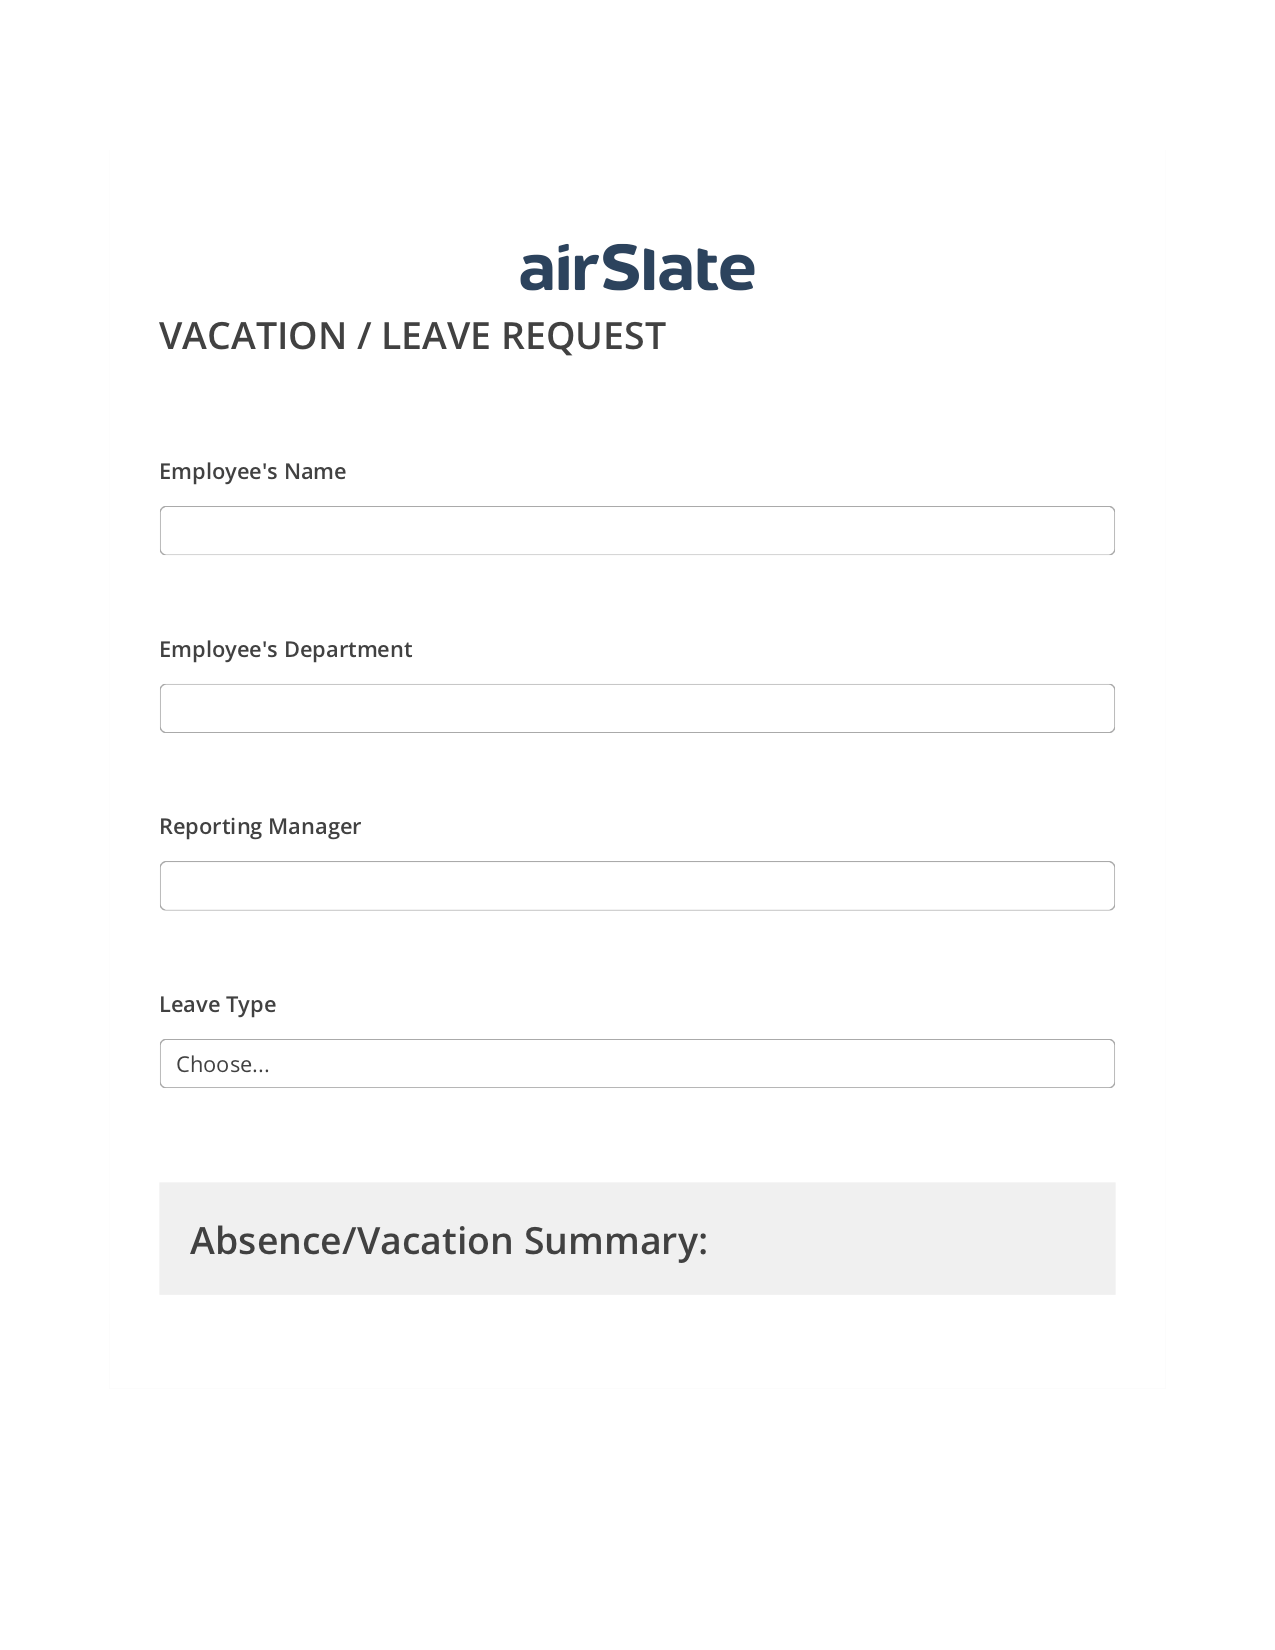 Vacation/Leave Request Workflow Pre-fill from MS Dynamics 365 Records, Unassign Role Bot, Export to Excel 365 Bot